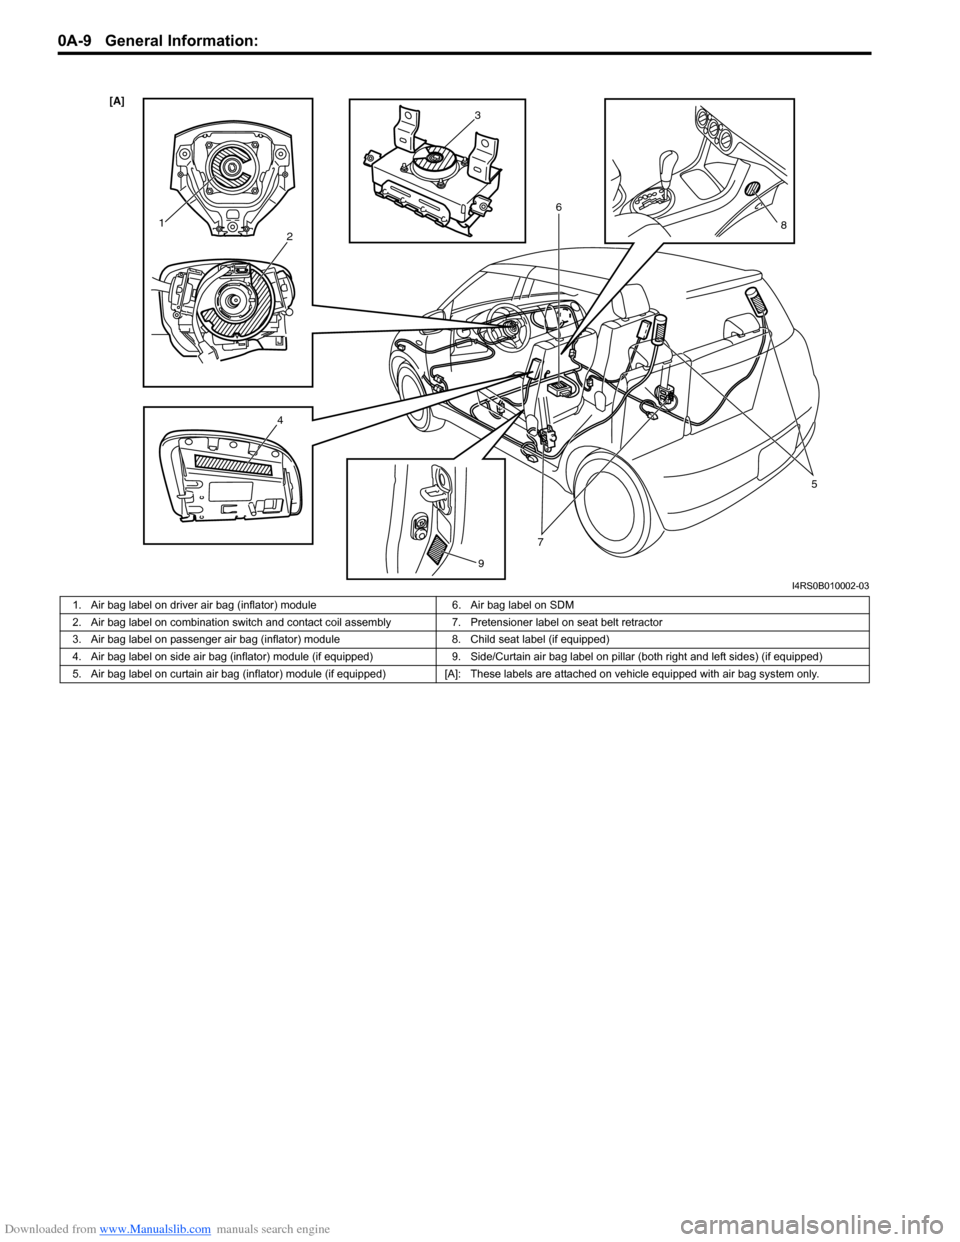 SUZUKI SWIFT 2006 2.G Service Owners Manual Downloaded from www.Manualslib.com manuals search engine 0A-9 General Information: 
[A] 
12
4 5
6
7 8
9
3
I4RS0B010002-03
1. Air bag label on driver air bag (inflator) module 6. Air bag label on SDM
2